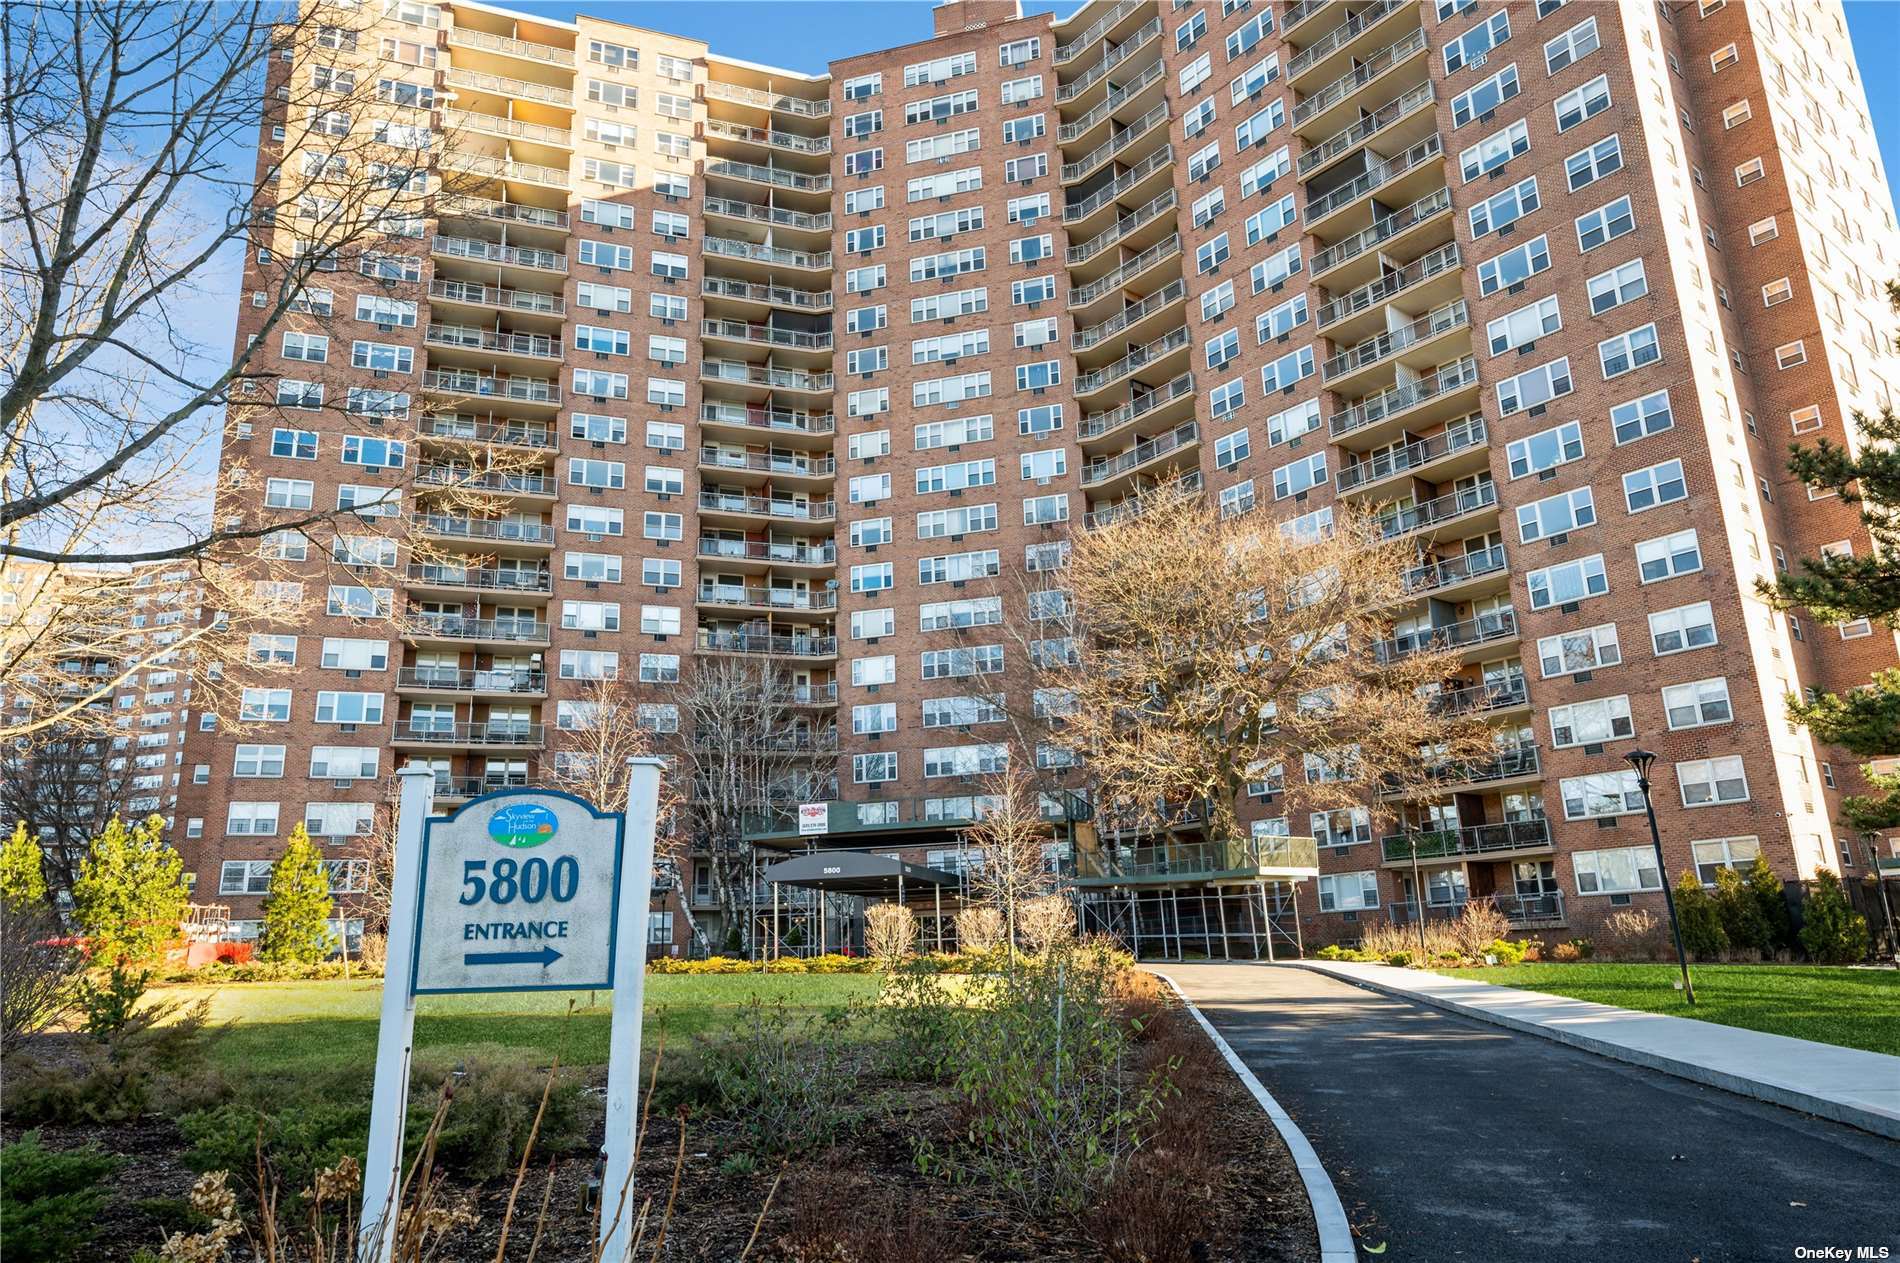 Property for Sale at 5800 Arlington Avenue 11N, Bronx, New York - Bathrooms: 1 
Rooms: 1  - $182,500